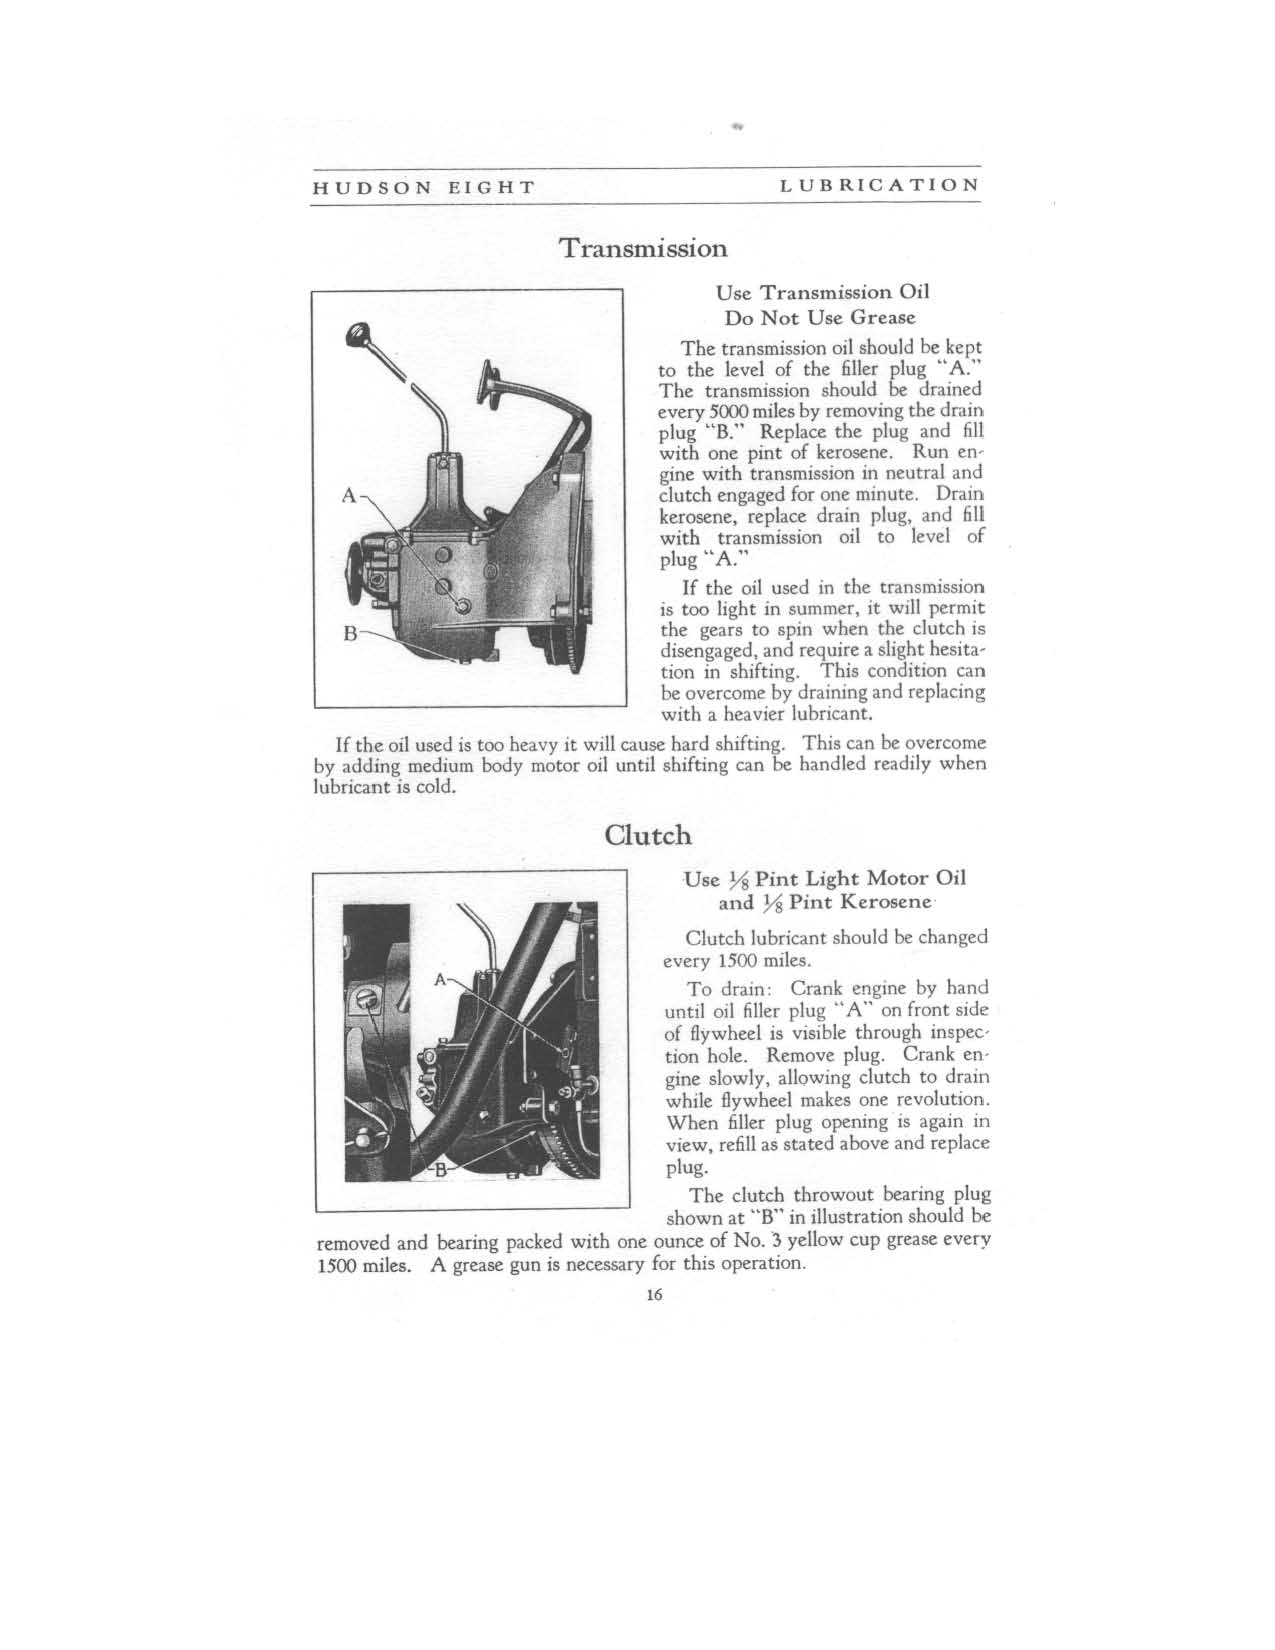 1931 Hudson 8 Instruction Book Page 15